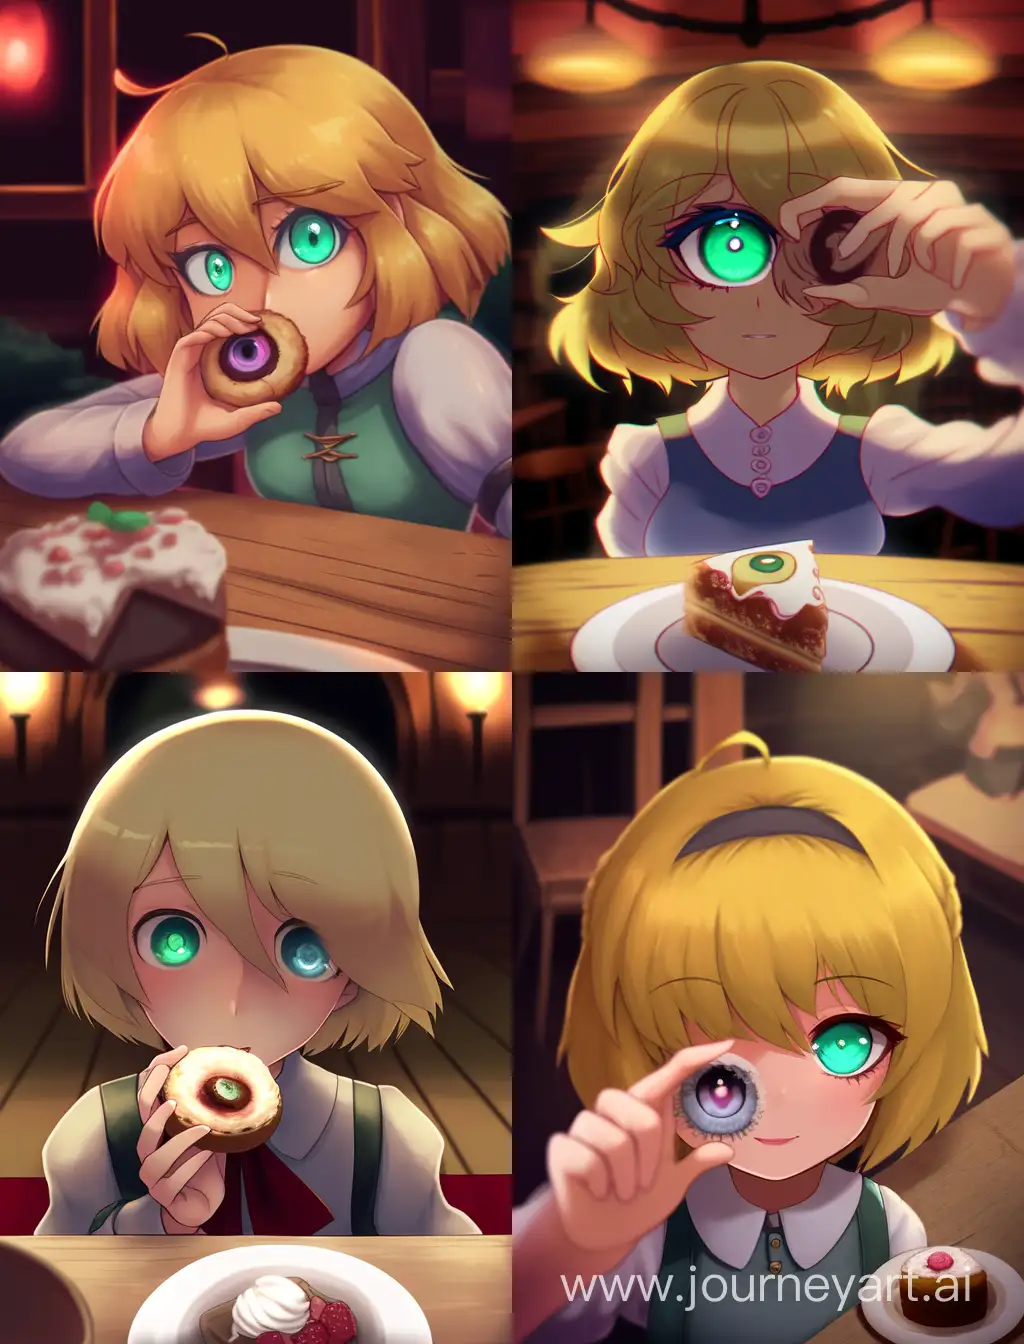 A level eye of A girl with short golden hair and green eyes with a glowing white circle eats a piece of cake with her hand in an old wooden restaurant and the background is blurry and dark, focusing on her and her eyes. 